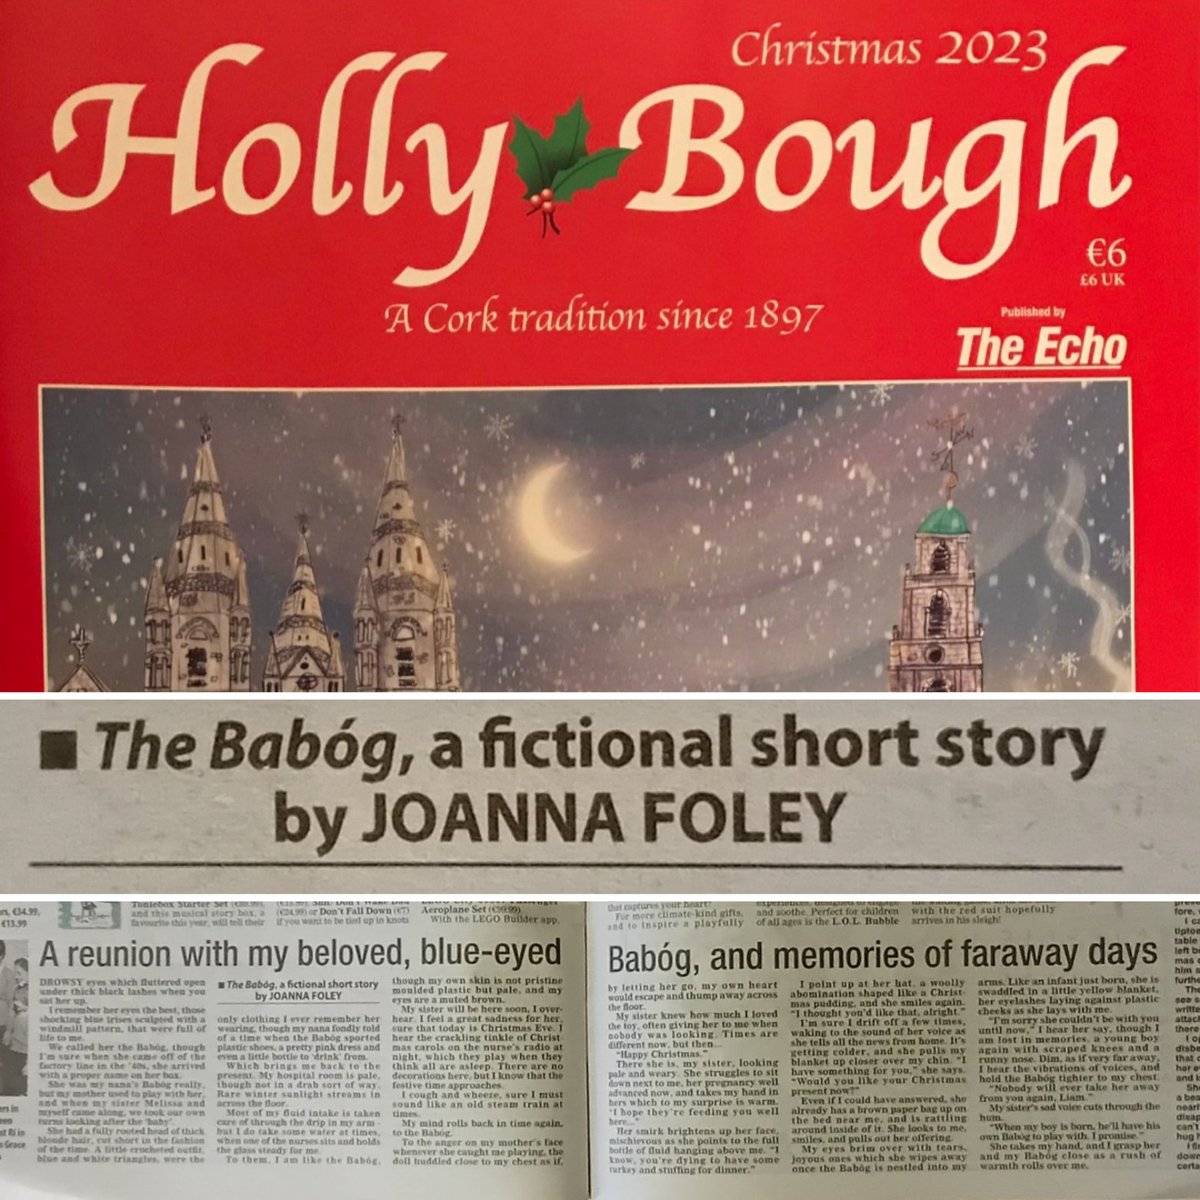 Unexpected, I learned last night that an #edited version of my #shortstory The Babóg, is in this years #HollyBough #Christmas #magazine! As a #toycollector, it's quite satisfying to have my story featuring a doll be on the same page as the Barbies! #irishwriter @Corkhollybough